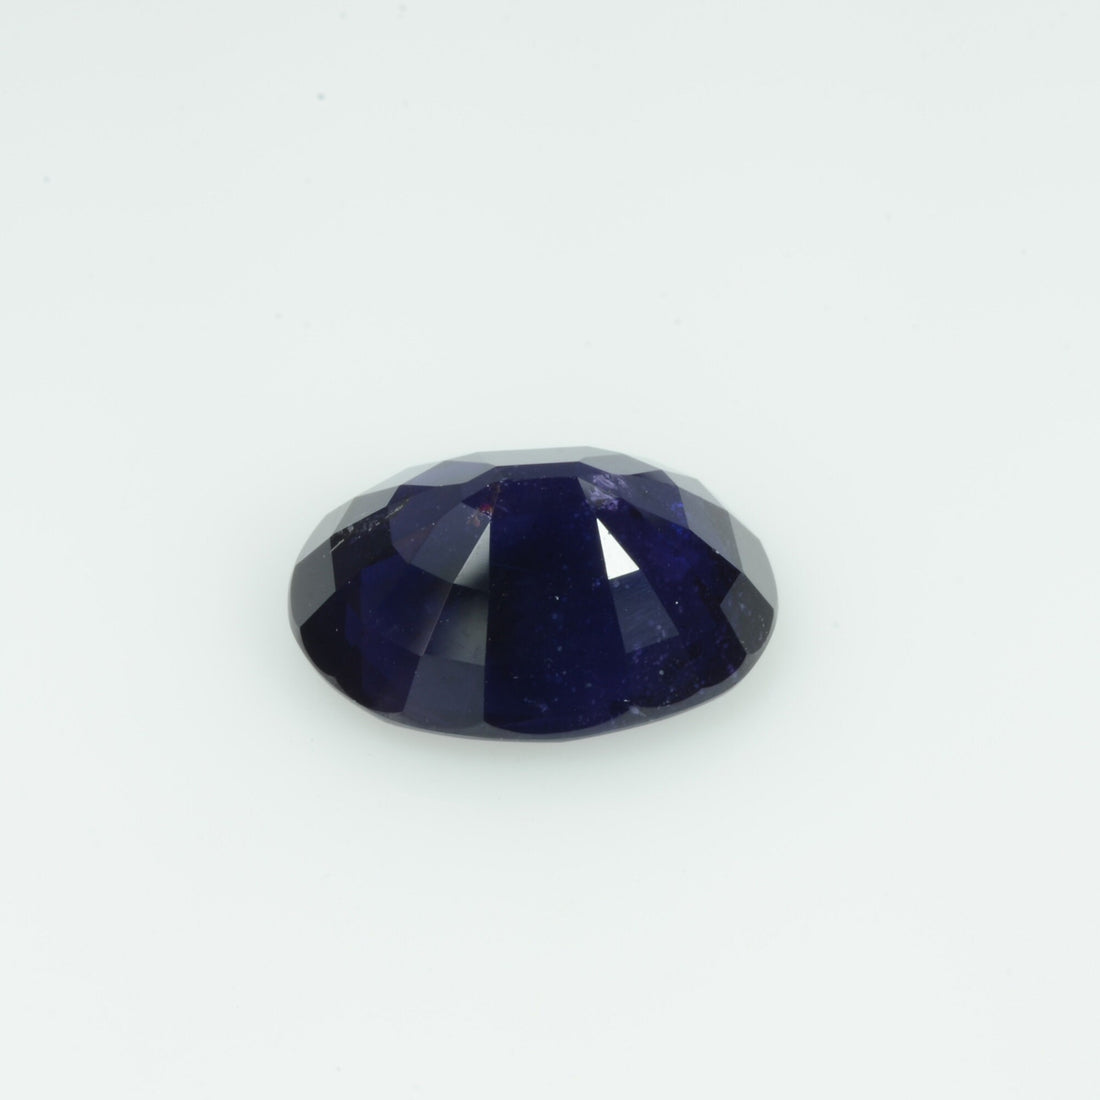 5.78 Cts Natural Fancy Purple Sapphire Loose Gemstone Oval Cut